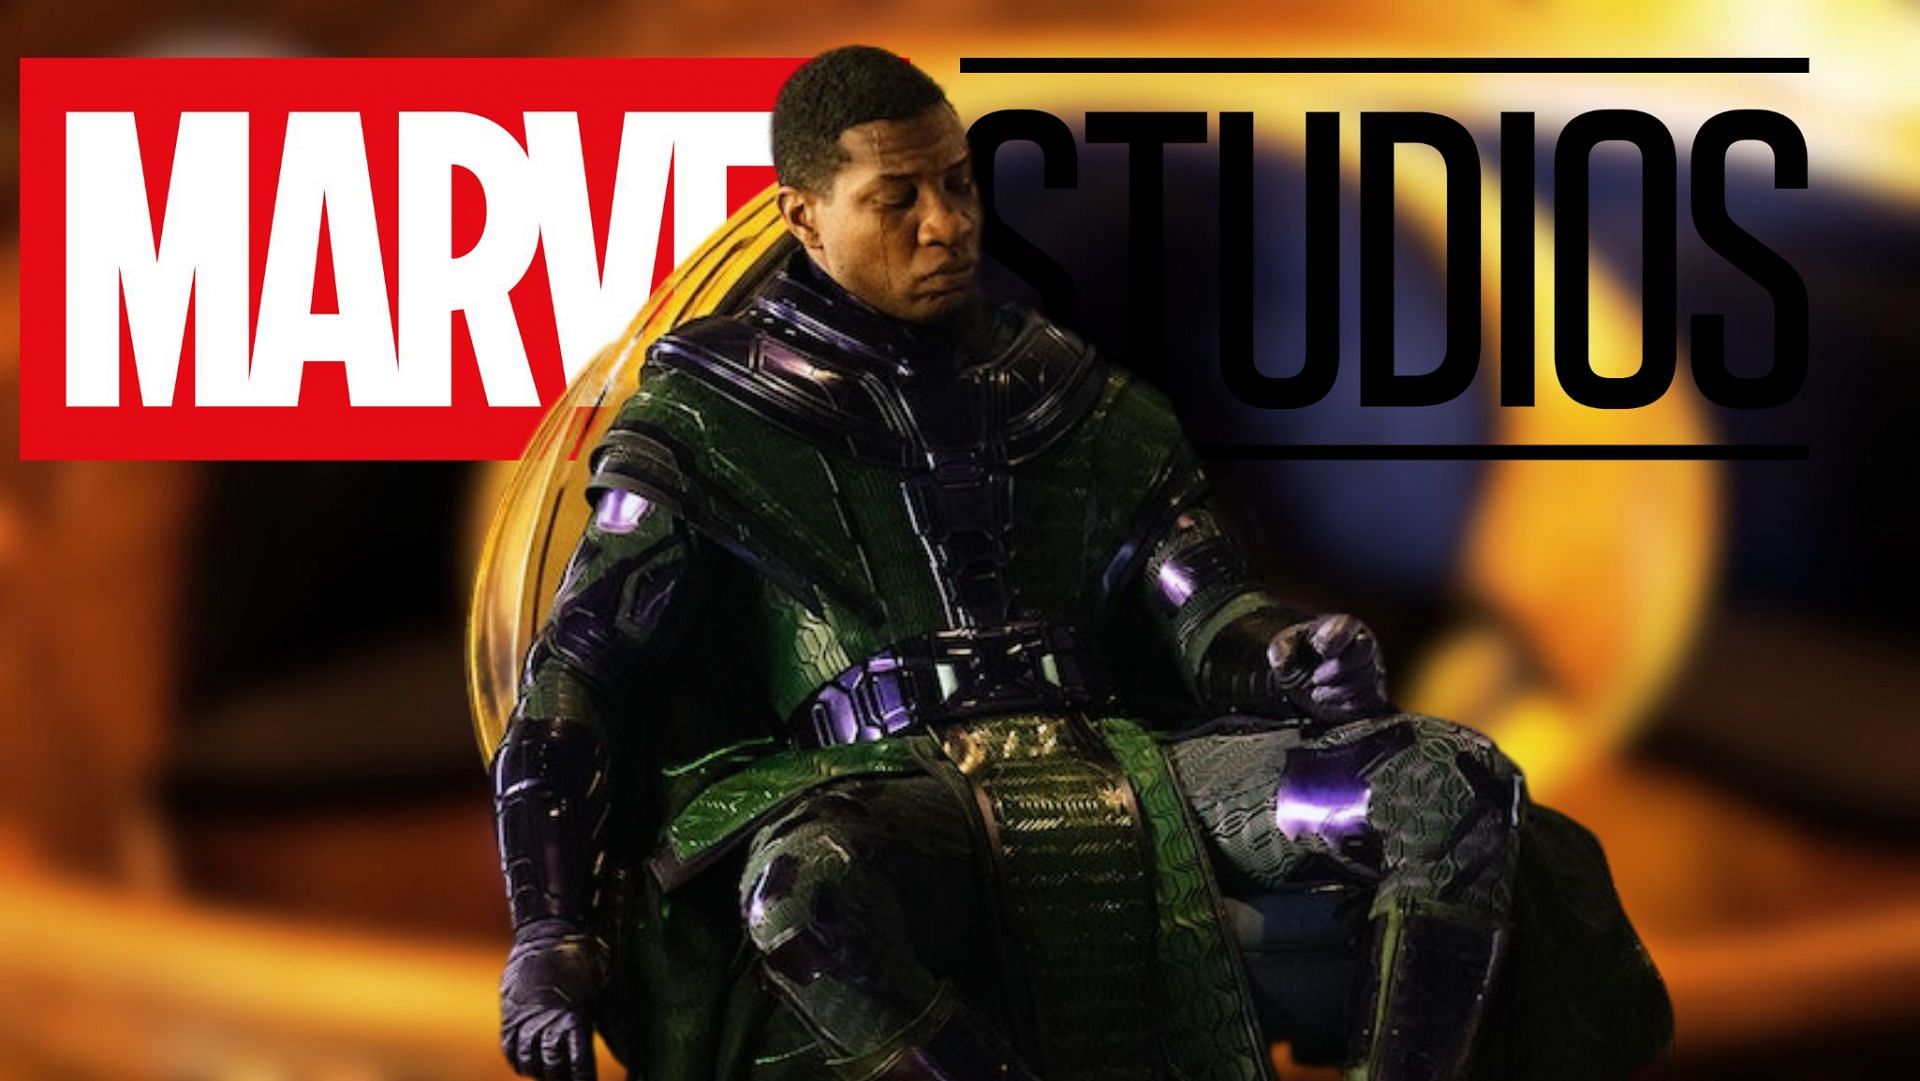 Avengers villain Kang the Conqueror in trouble with the law: Jonathan Majors faces up to a year in jail for assault charge (Image via Sportskeeda)